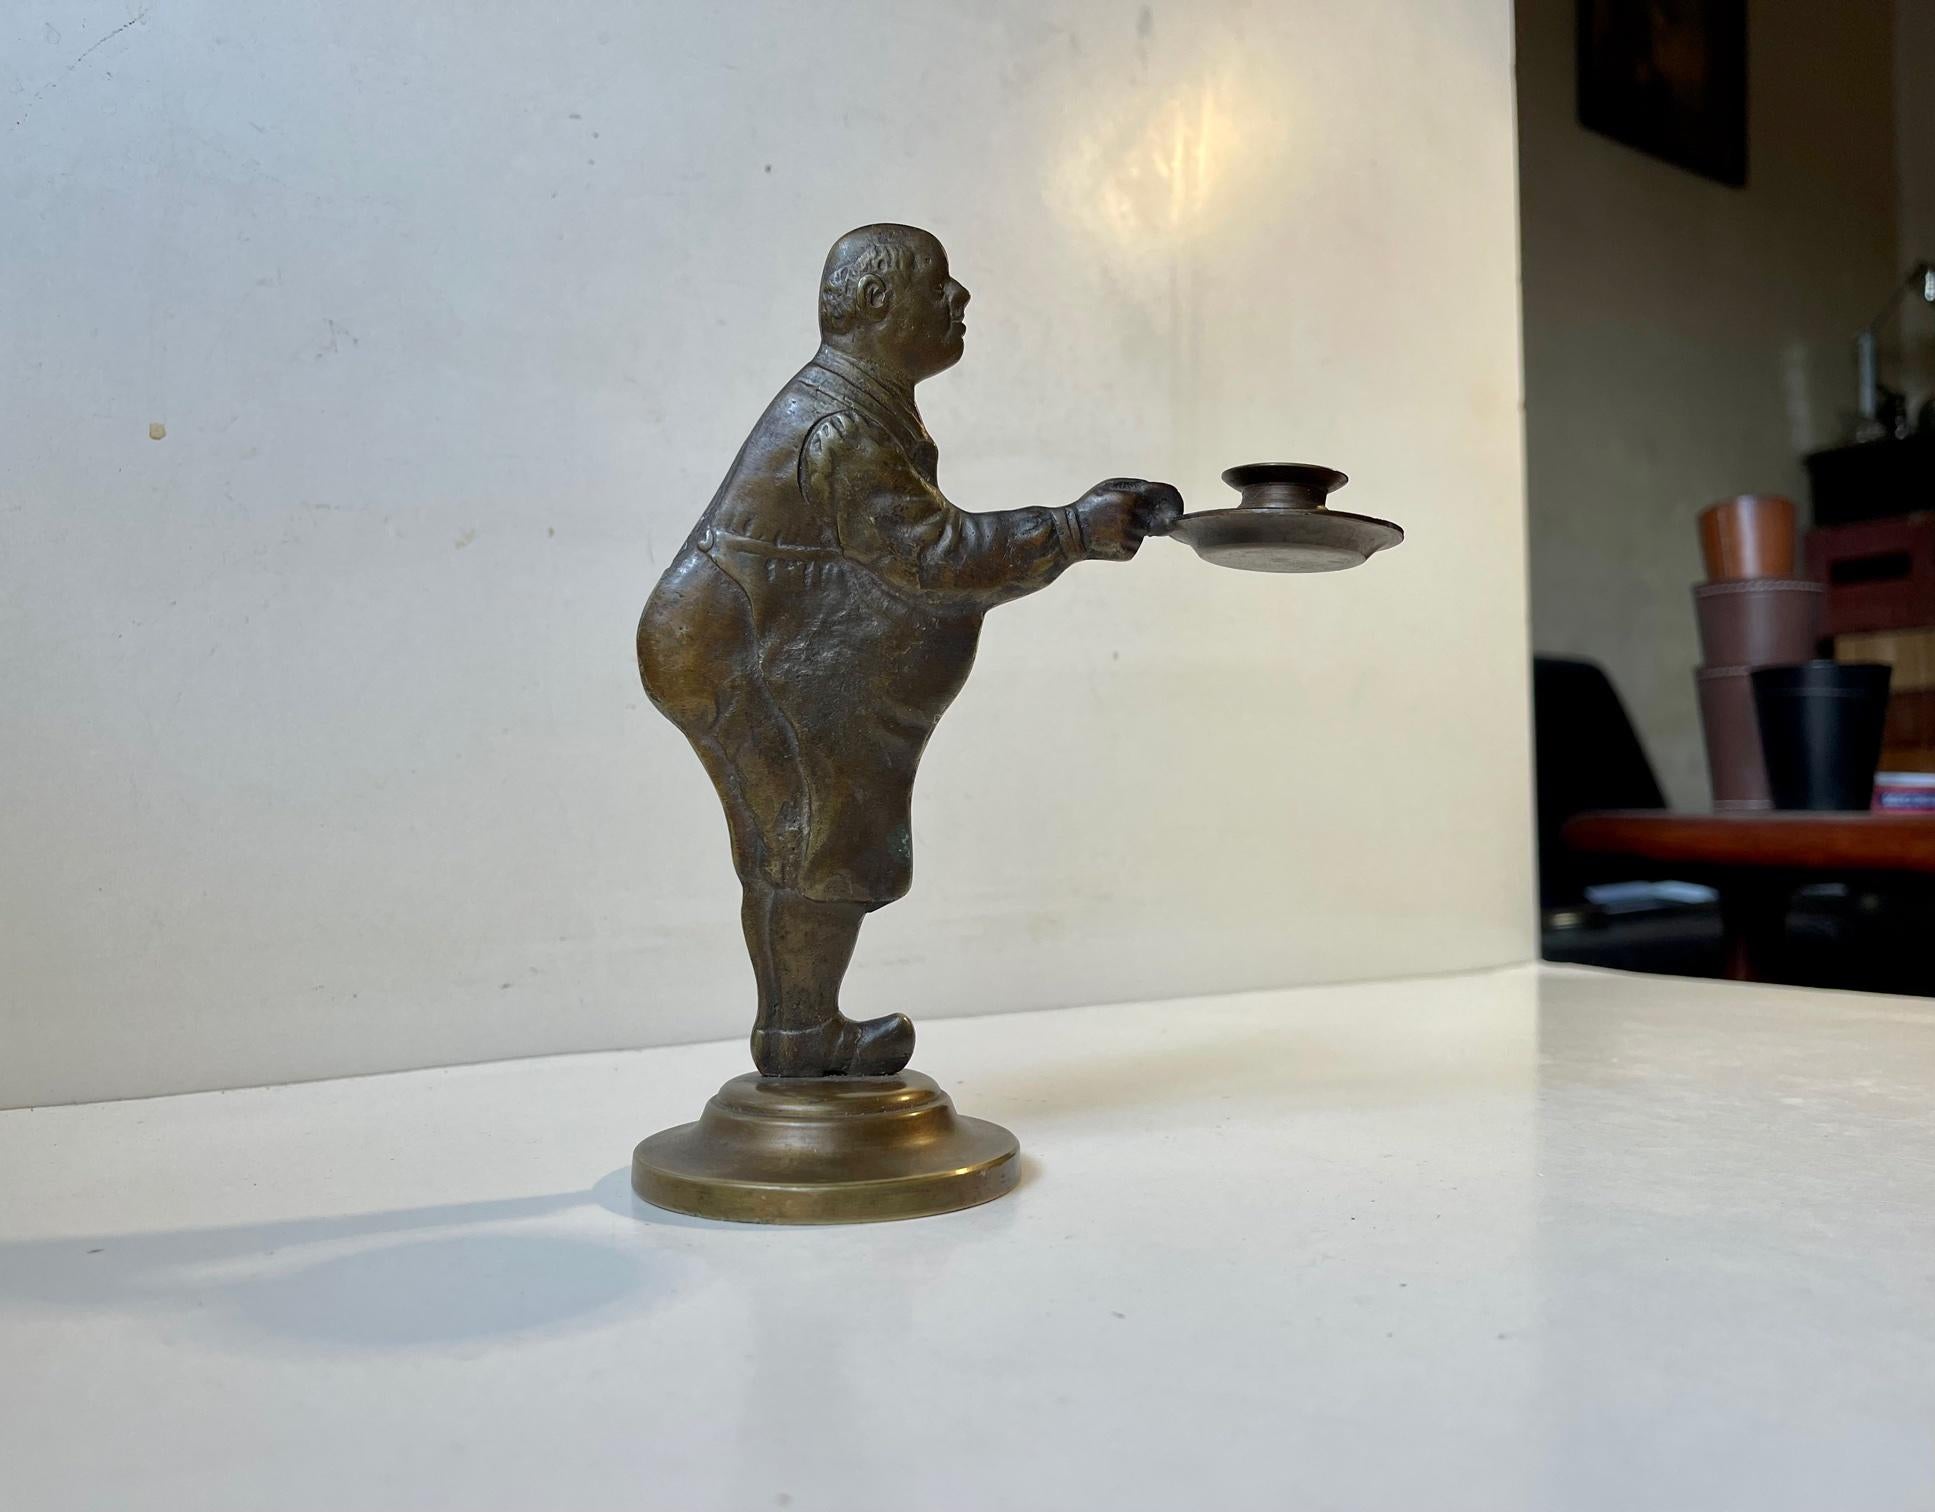 Humorous Storm P. (Danish cartoonist7/illustrator) inspired candlestick in patinated bronze. Motif: corpulent man/Blacksmith Details/attributed to both sides. It is to be installed with a taper/1 cm candle. Measurements: H: 18 cm, W: 15 cm.